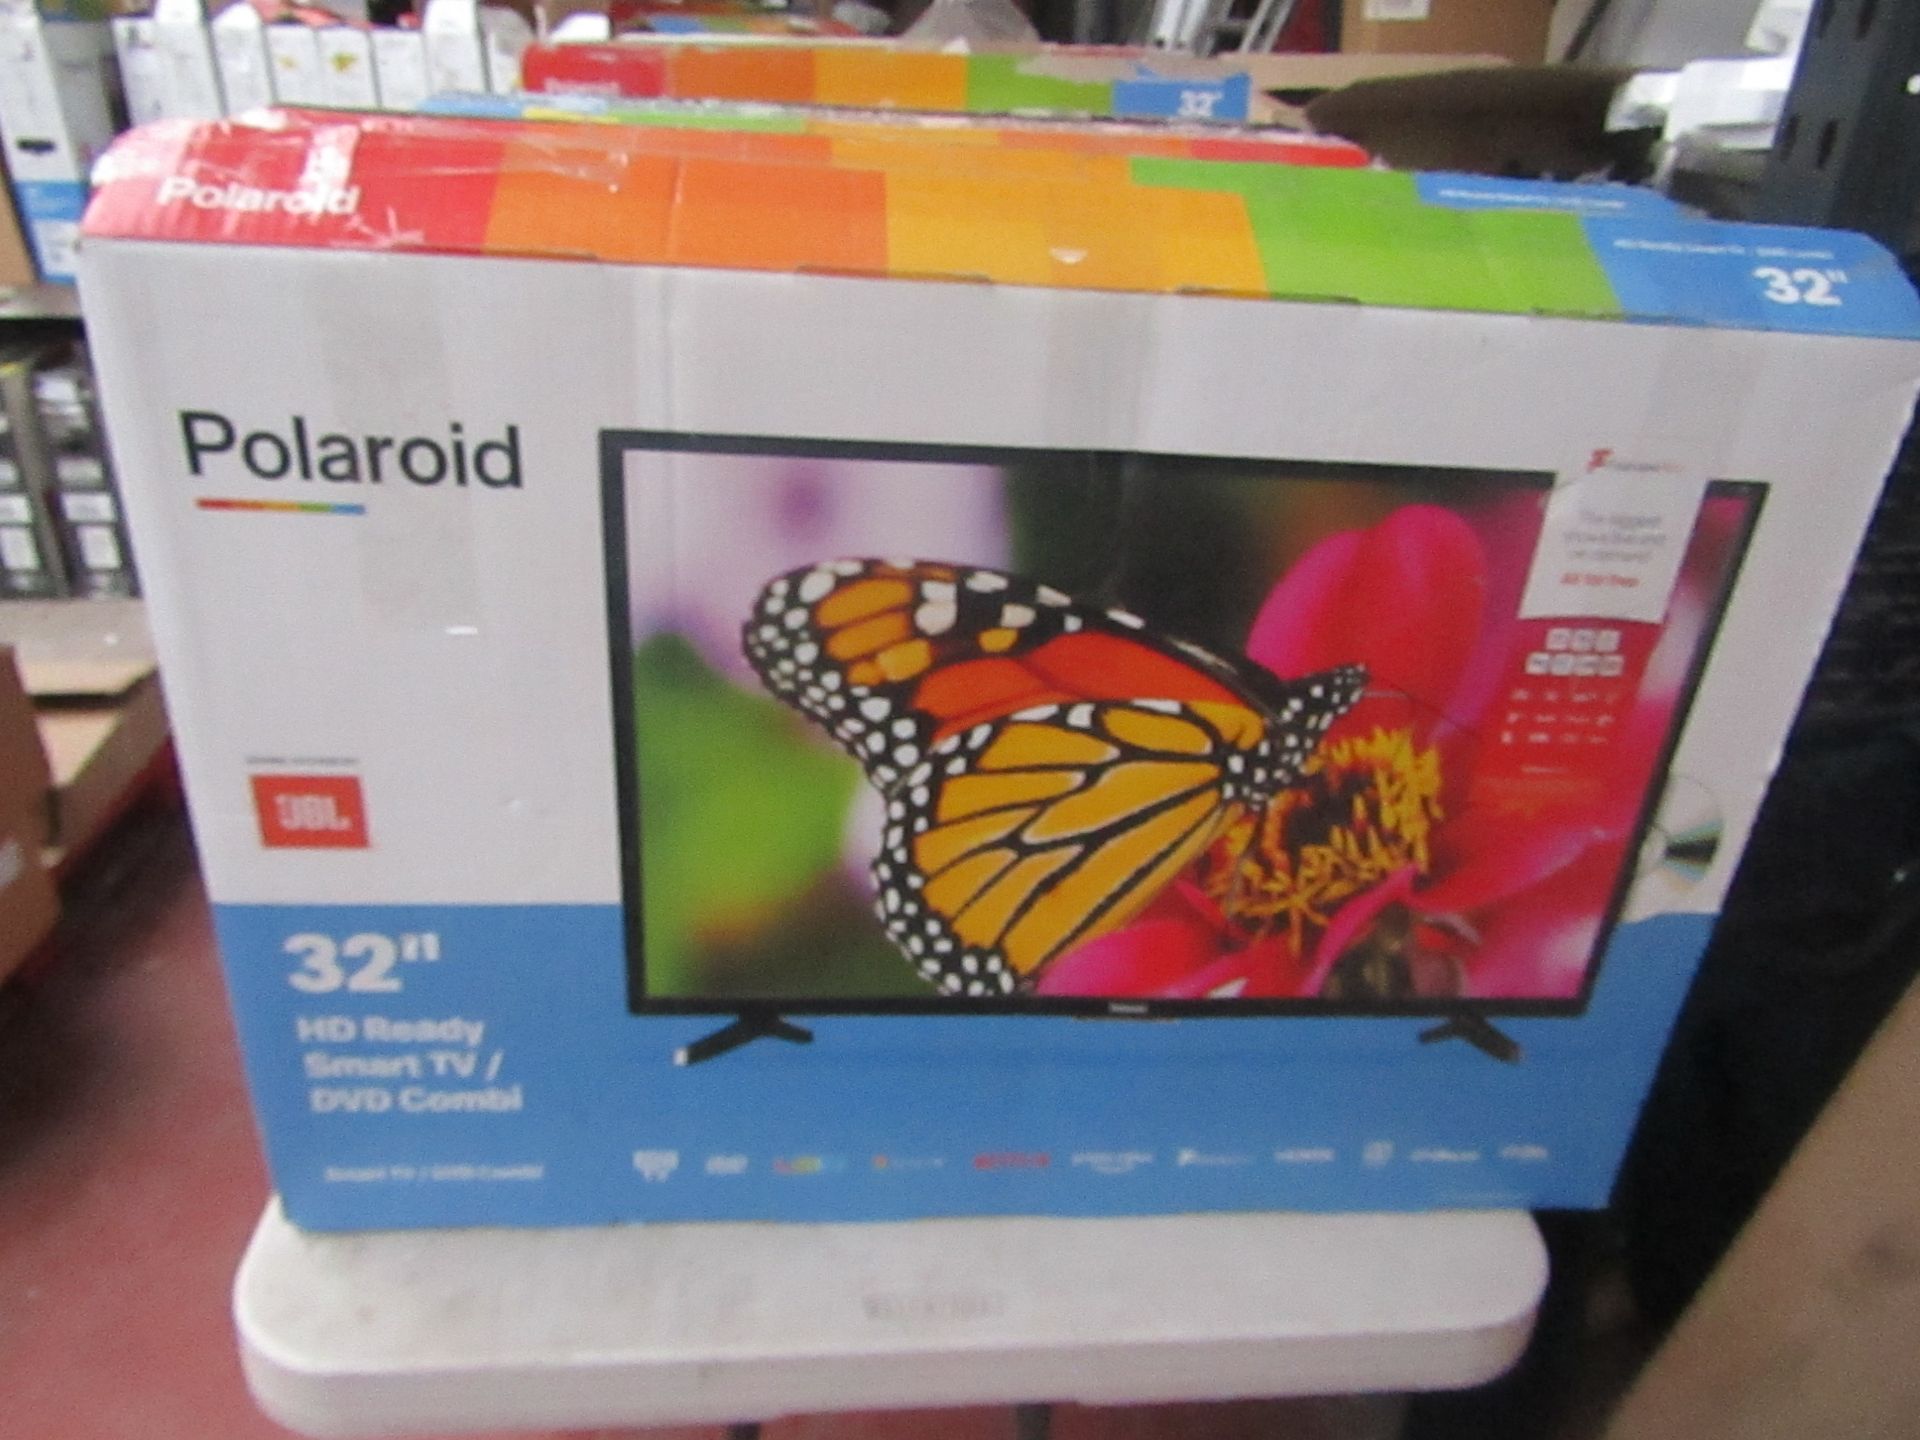 | 1x | POLAROID 32" HD READY SMART TV / DVD COMBI | POWERS ON INCLUDES REMOTE CONTROL & STAND |